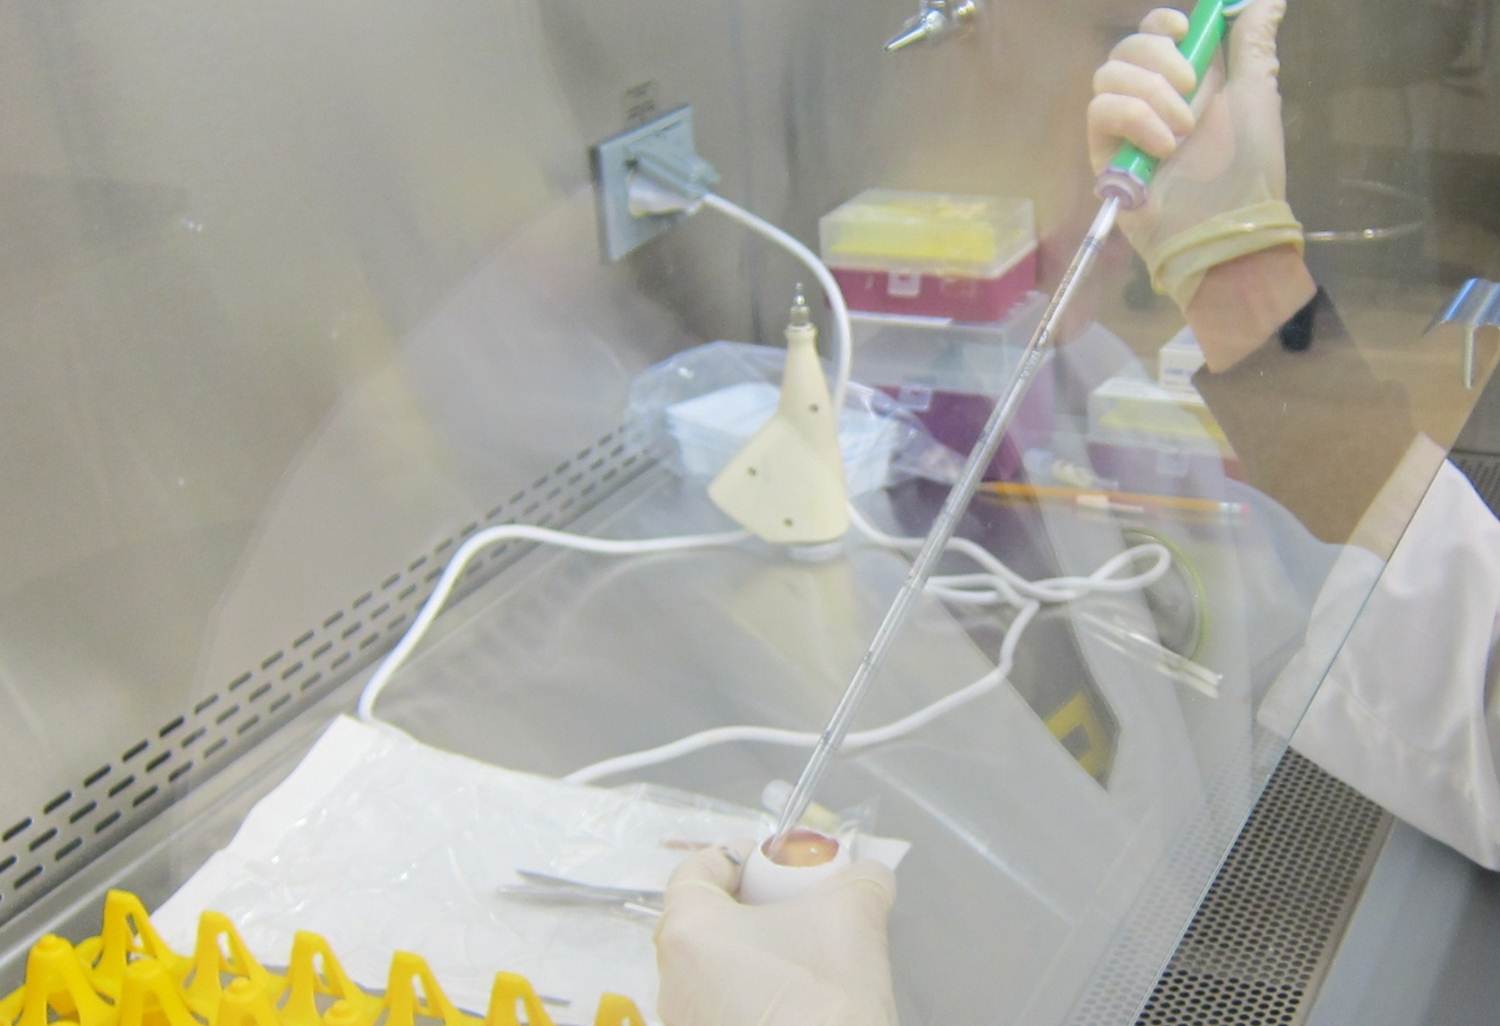 Samples collected for avian influenza testing are inoculated into specific-pathogen-free chicken eggs.  These eggs are incubated and amnio-allantoic fluid is harvested and tested for virus growth by hemagglutination (HA) assay.